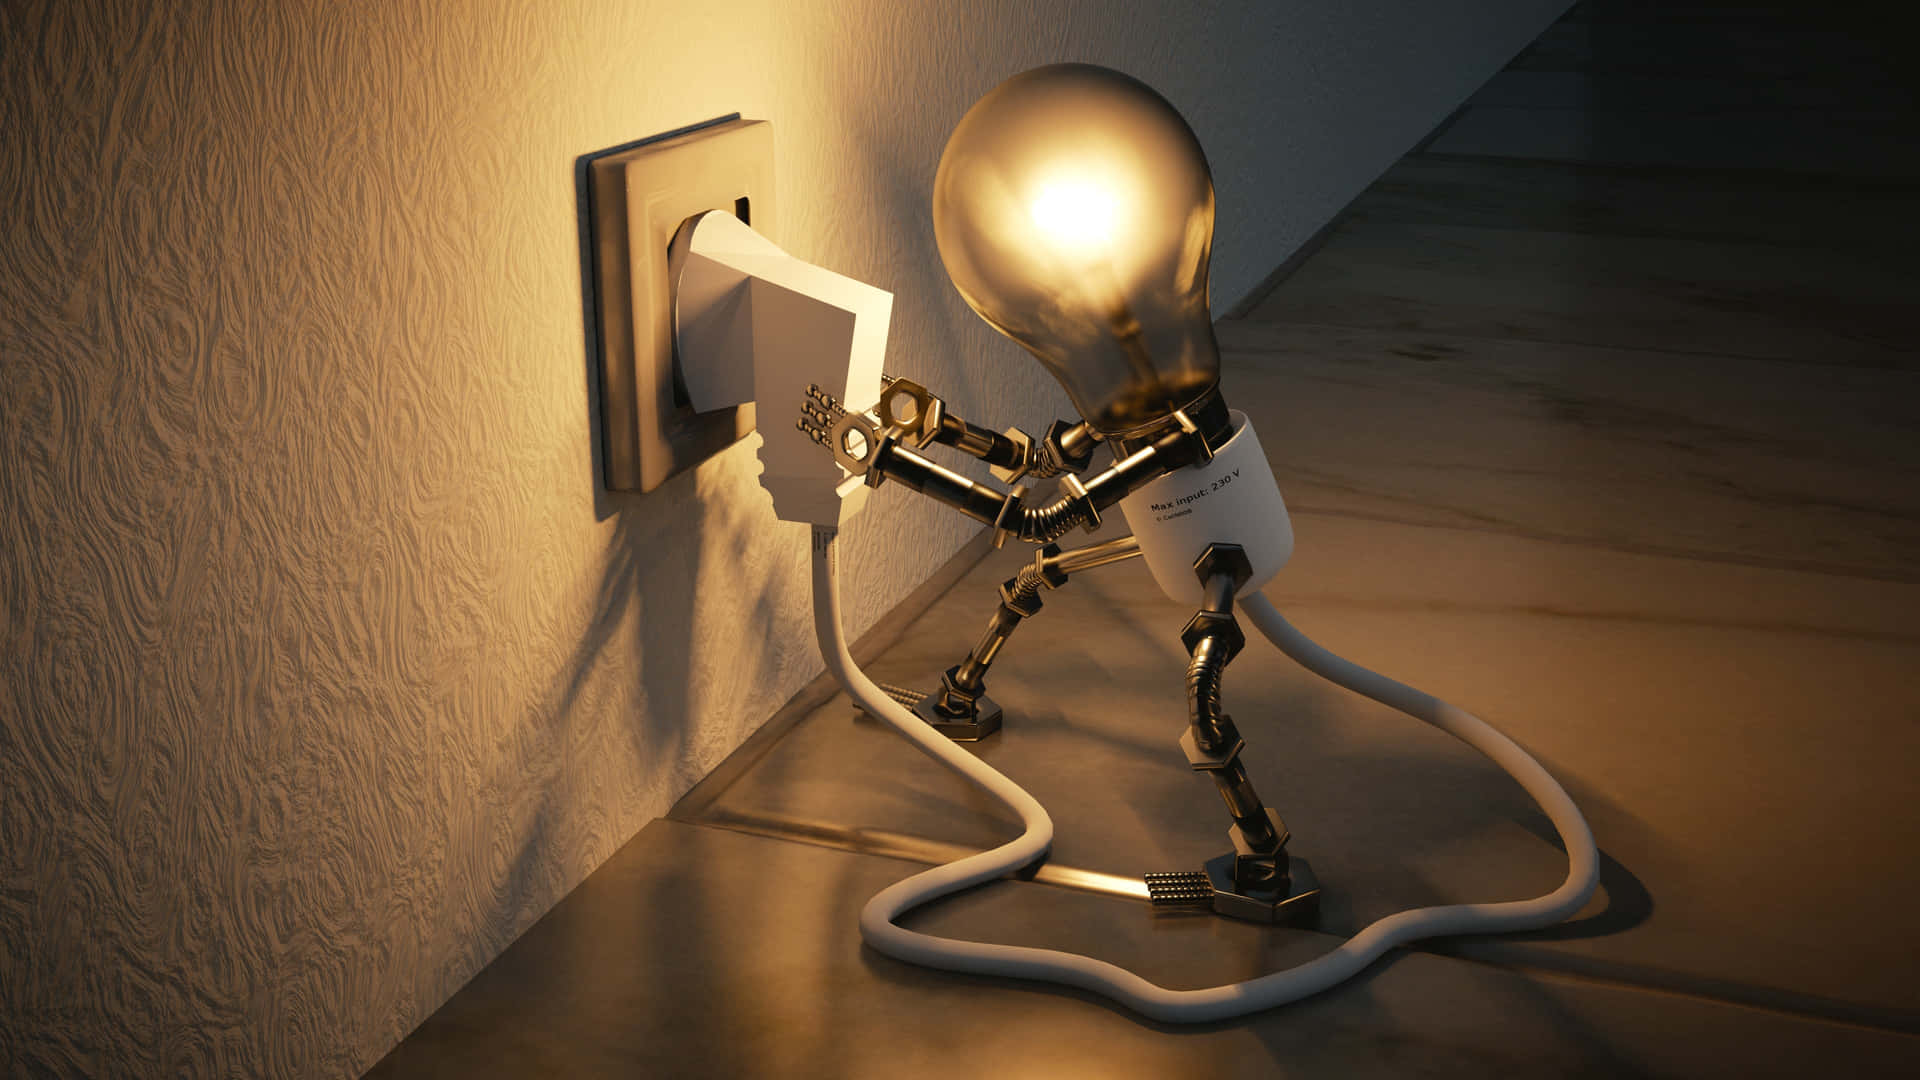 Animated Electric Bulb Wallpaper